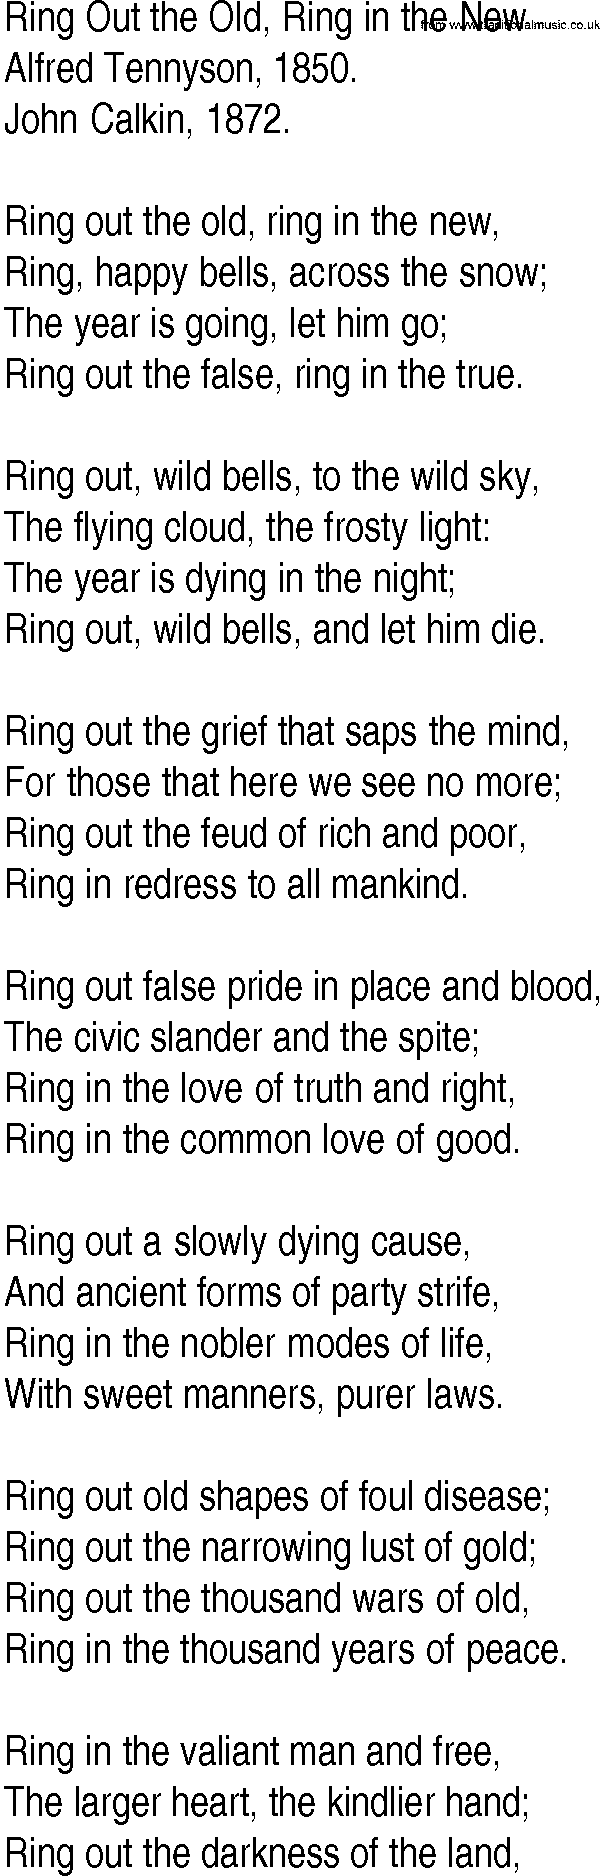 Hymn and Gospel Song: Ring Out the Old, Ring in the New by Alfred Tennyson lyrics